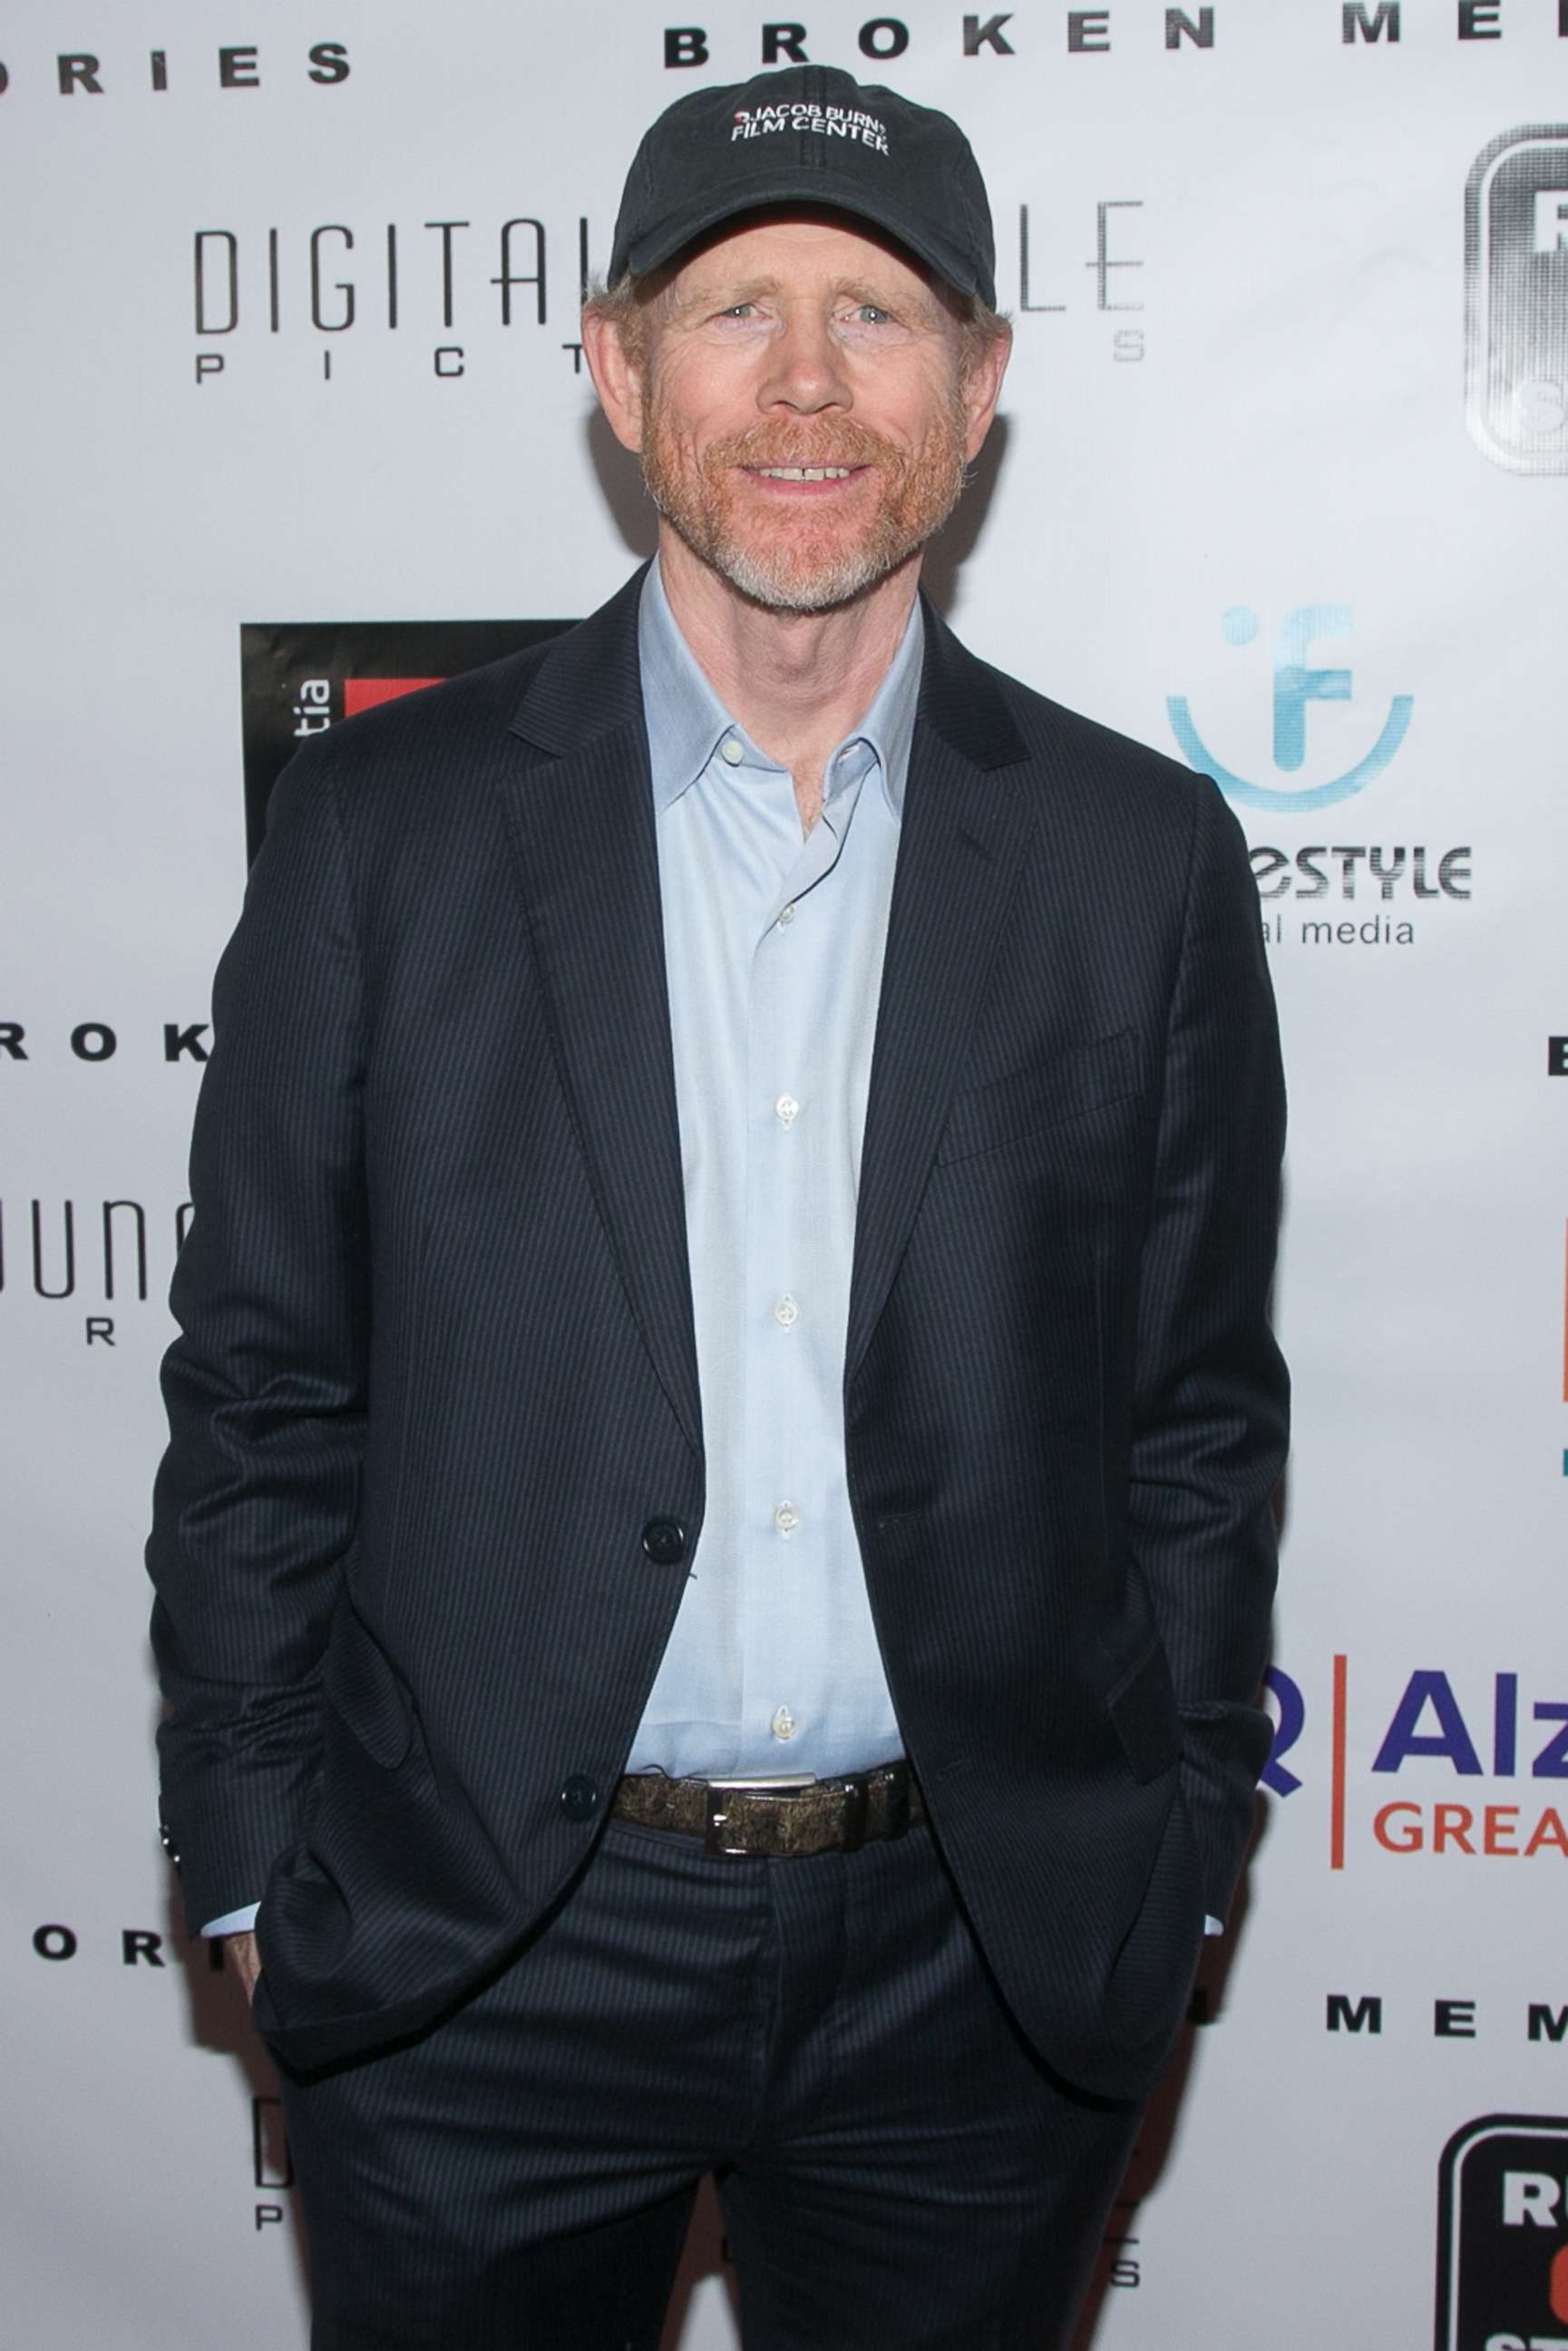 PHOTO: Ron Howard arrives for the benefit screening of Digital Jungle Pictures' "Broken Memories" at Writers Guild Theater on Nov. 14, 2017 in Beverly Hills, Calif.